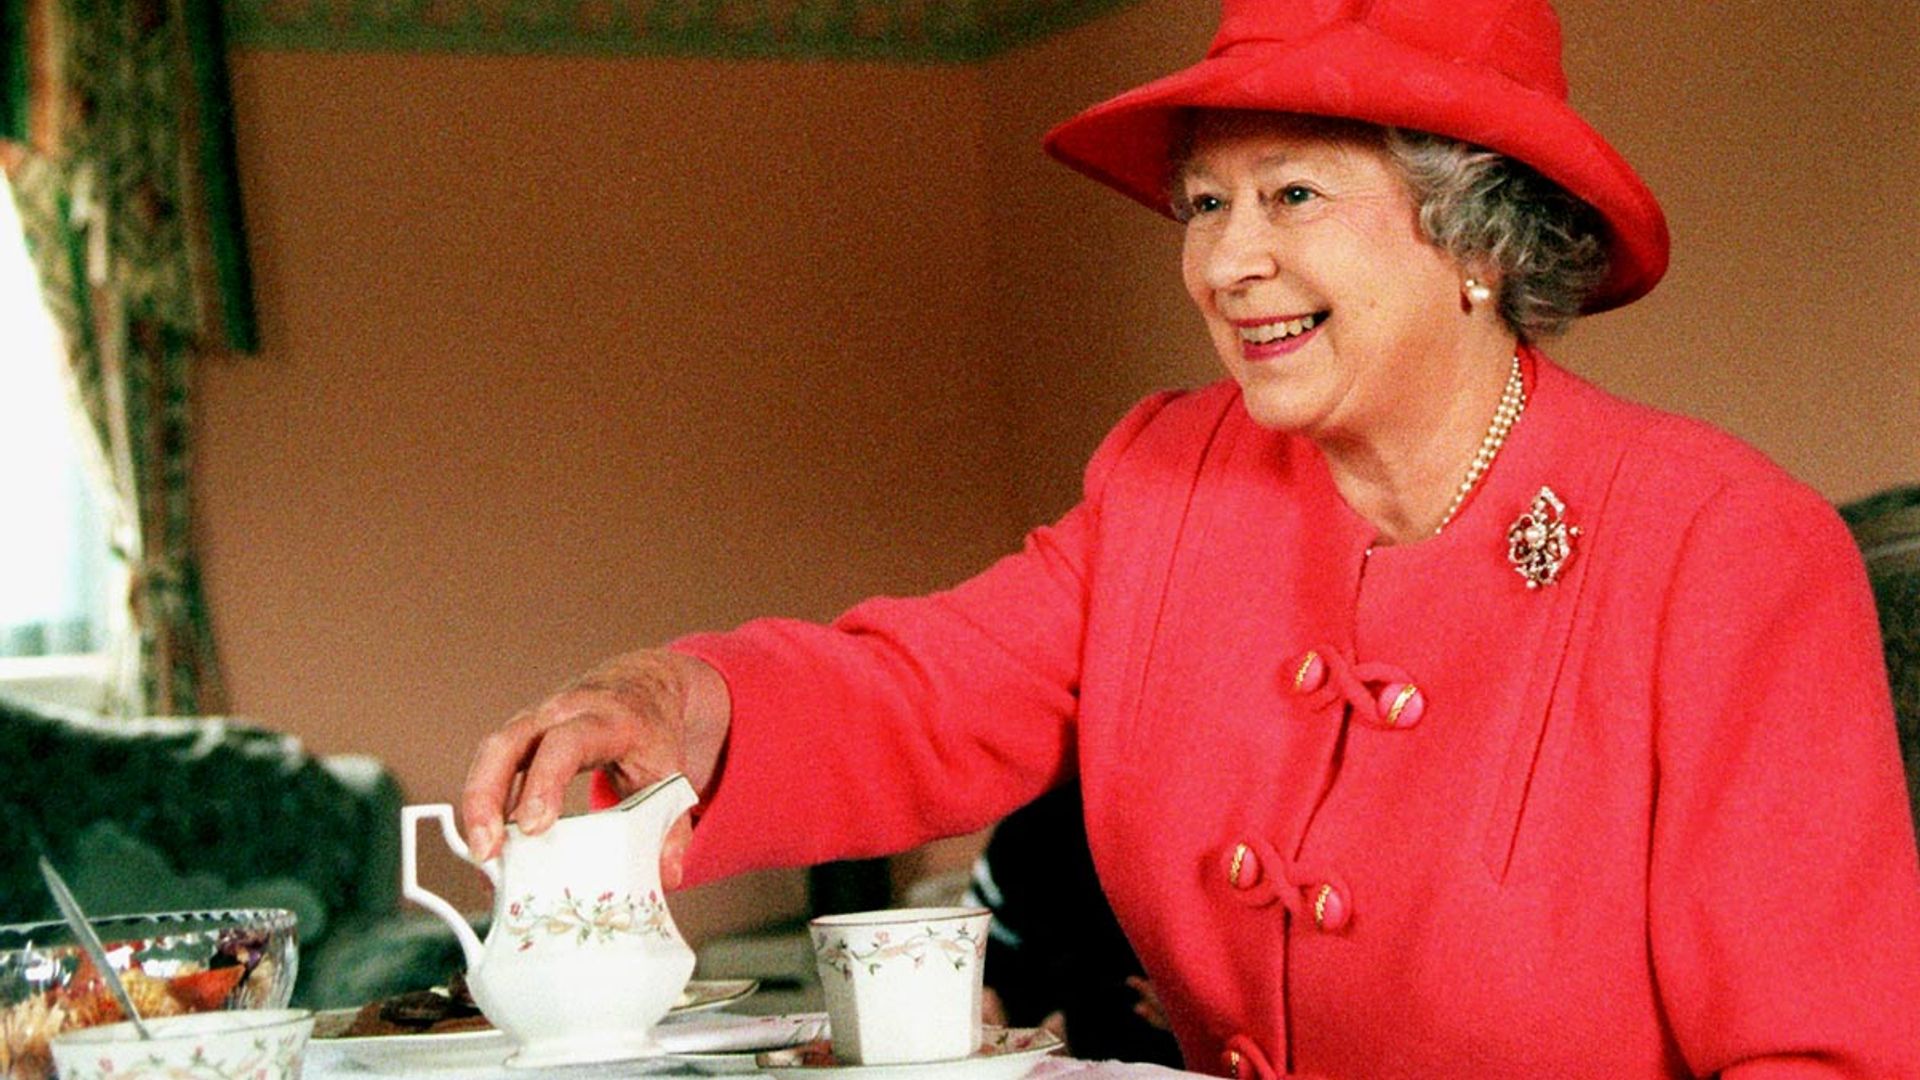 The decadent snack the Queen and Prince Philip will be eating at Balmoral Castle